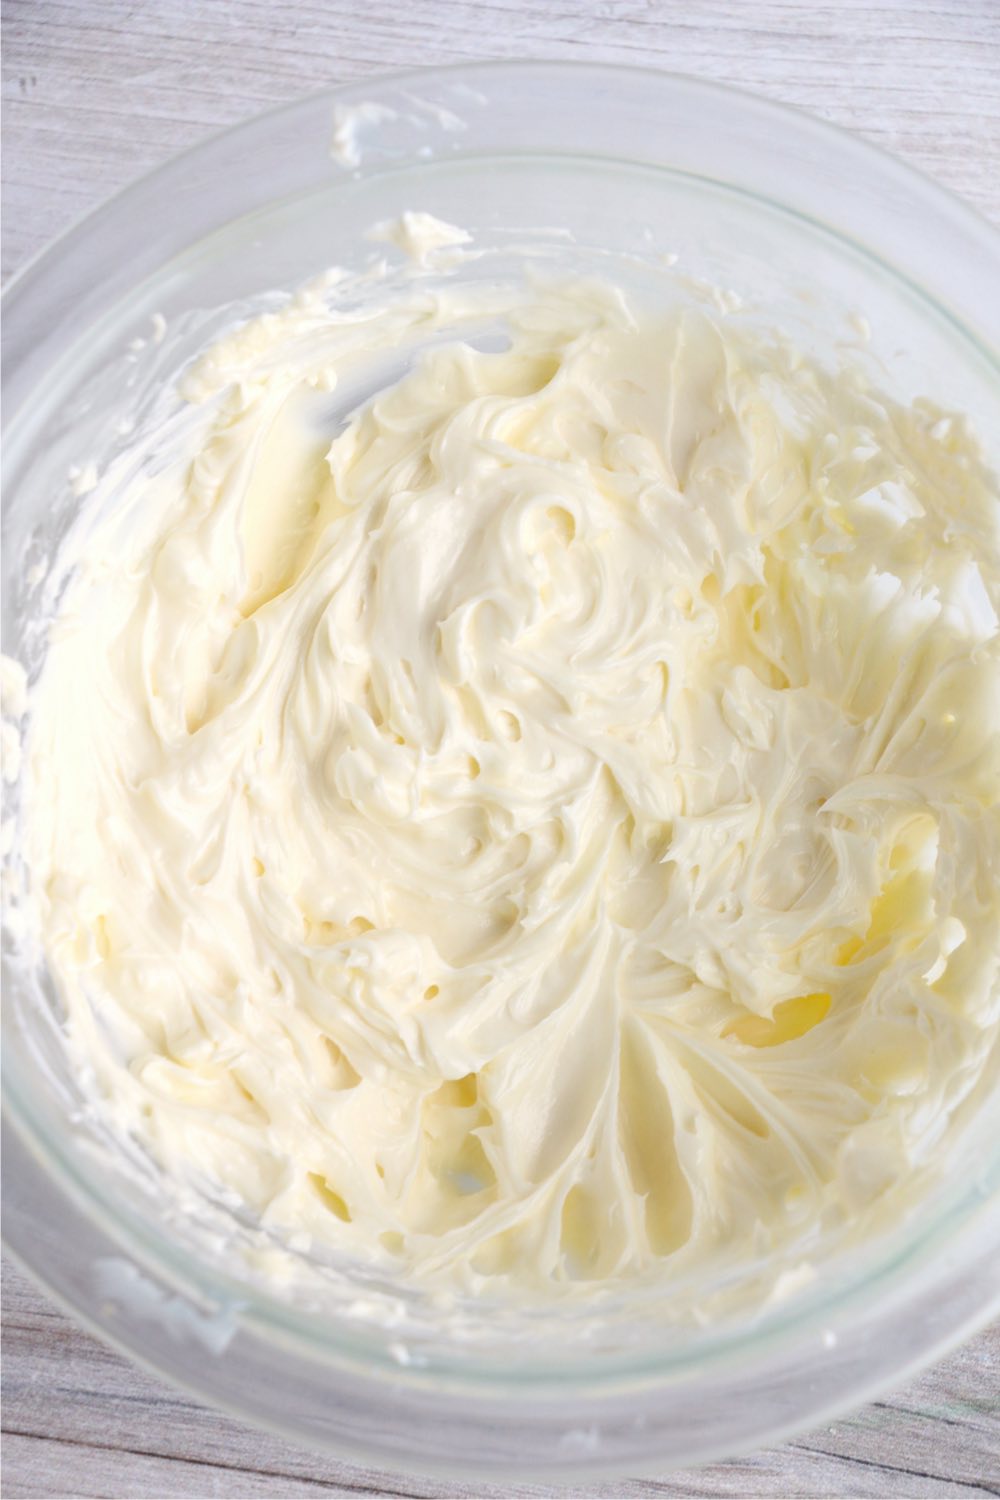 blended butter and cream cheese in a glass bowl